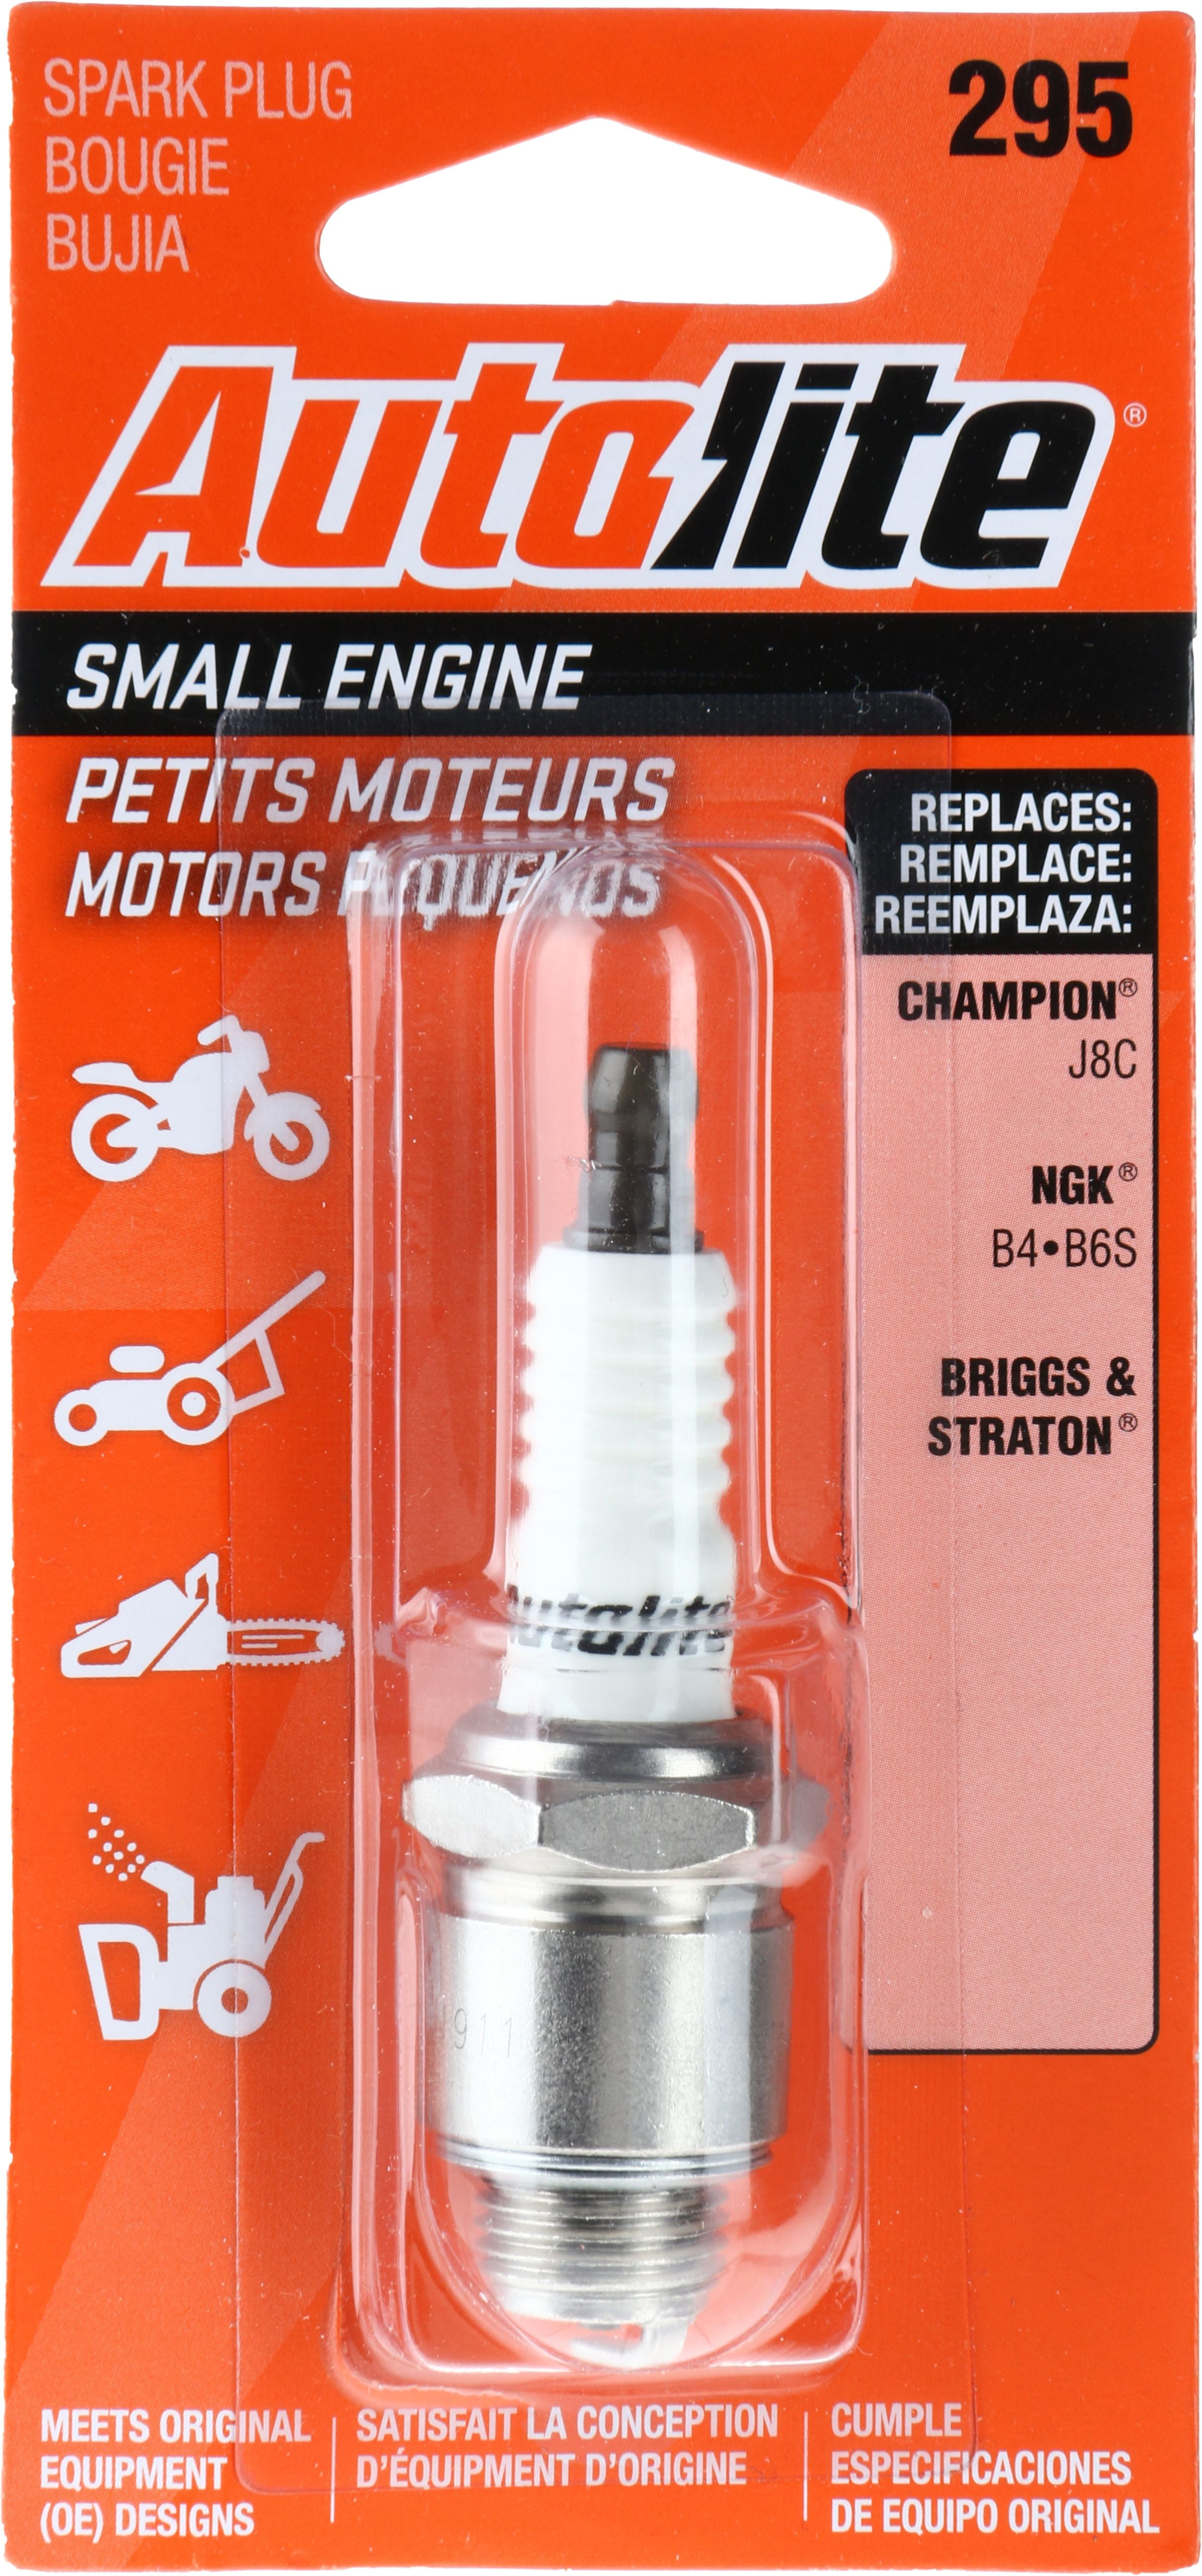 Autolite Small Engine Spark Plug, 295 for Select Tecumseh Engine Power Equipment, Lawn Mowers and Garden Tractors